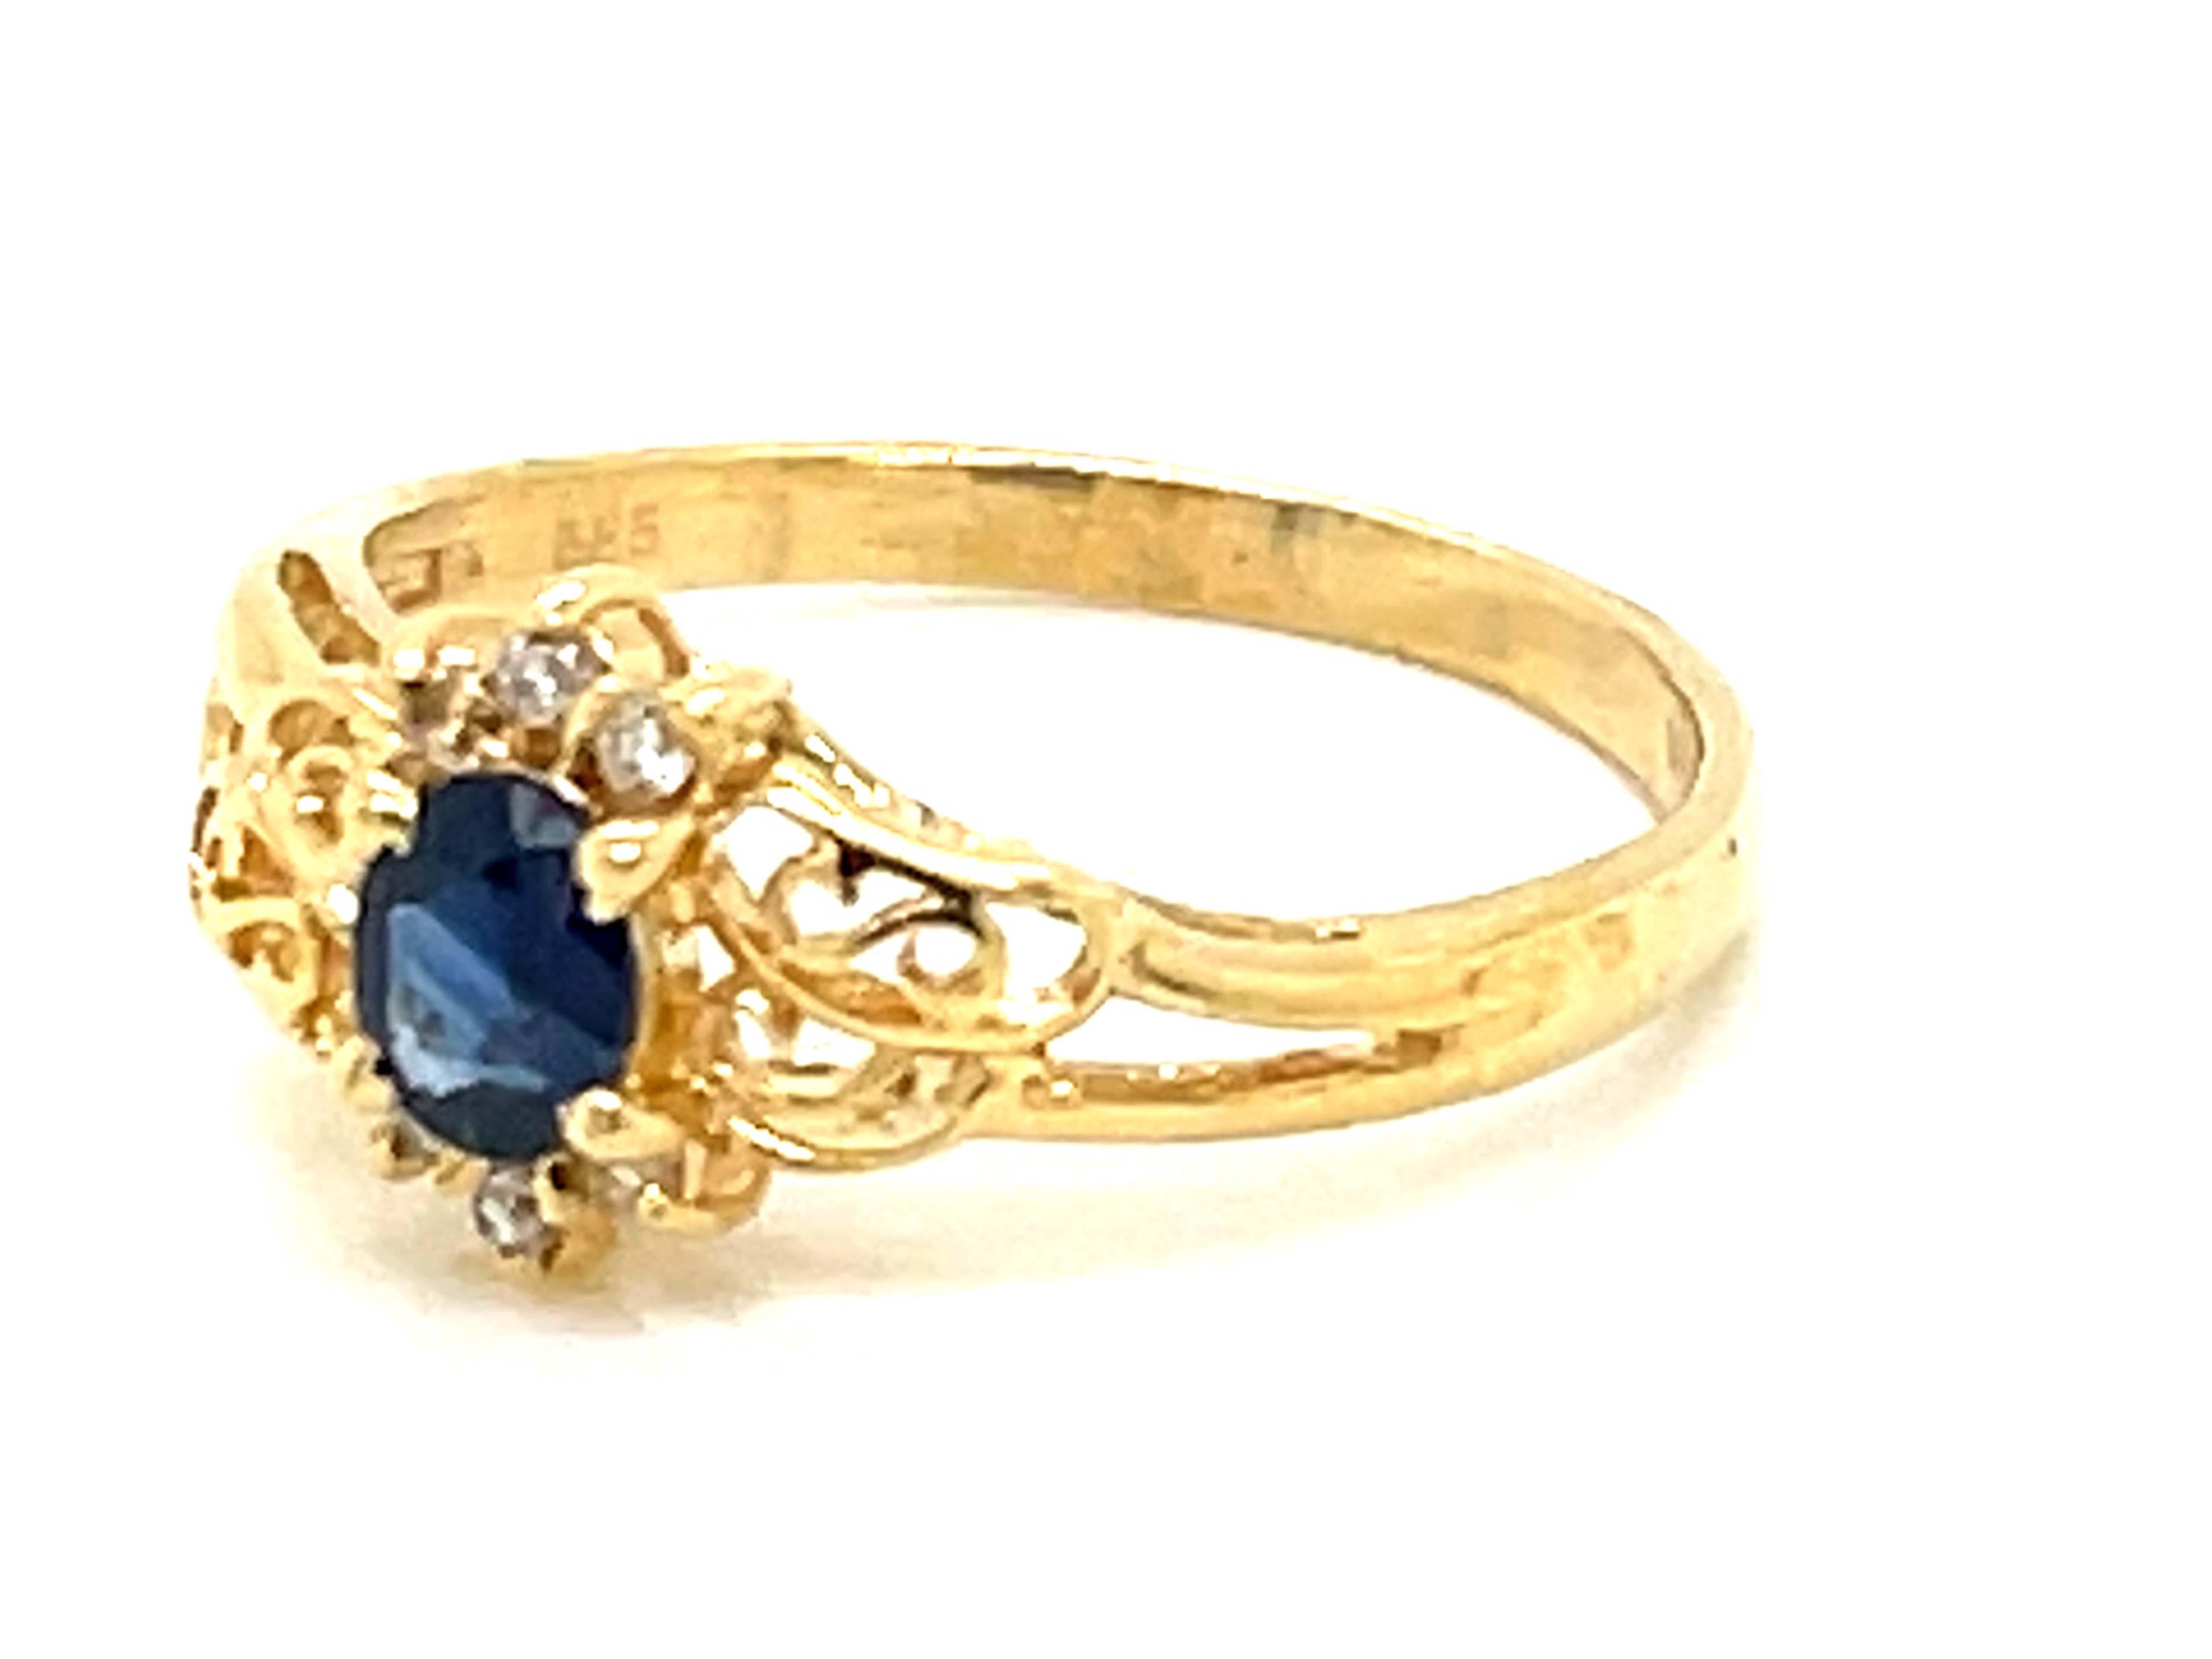 Marquise Cut Sapphire and Diamond Ring in 14k Yellow Gold